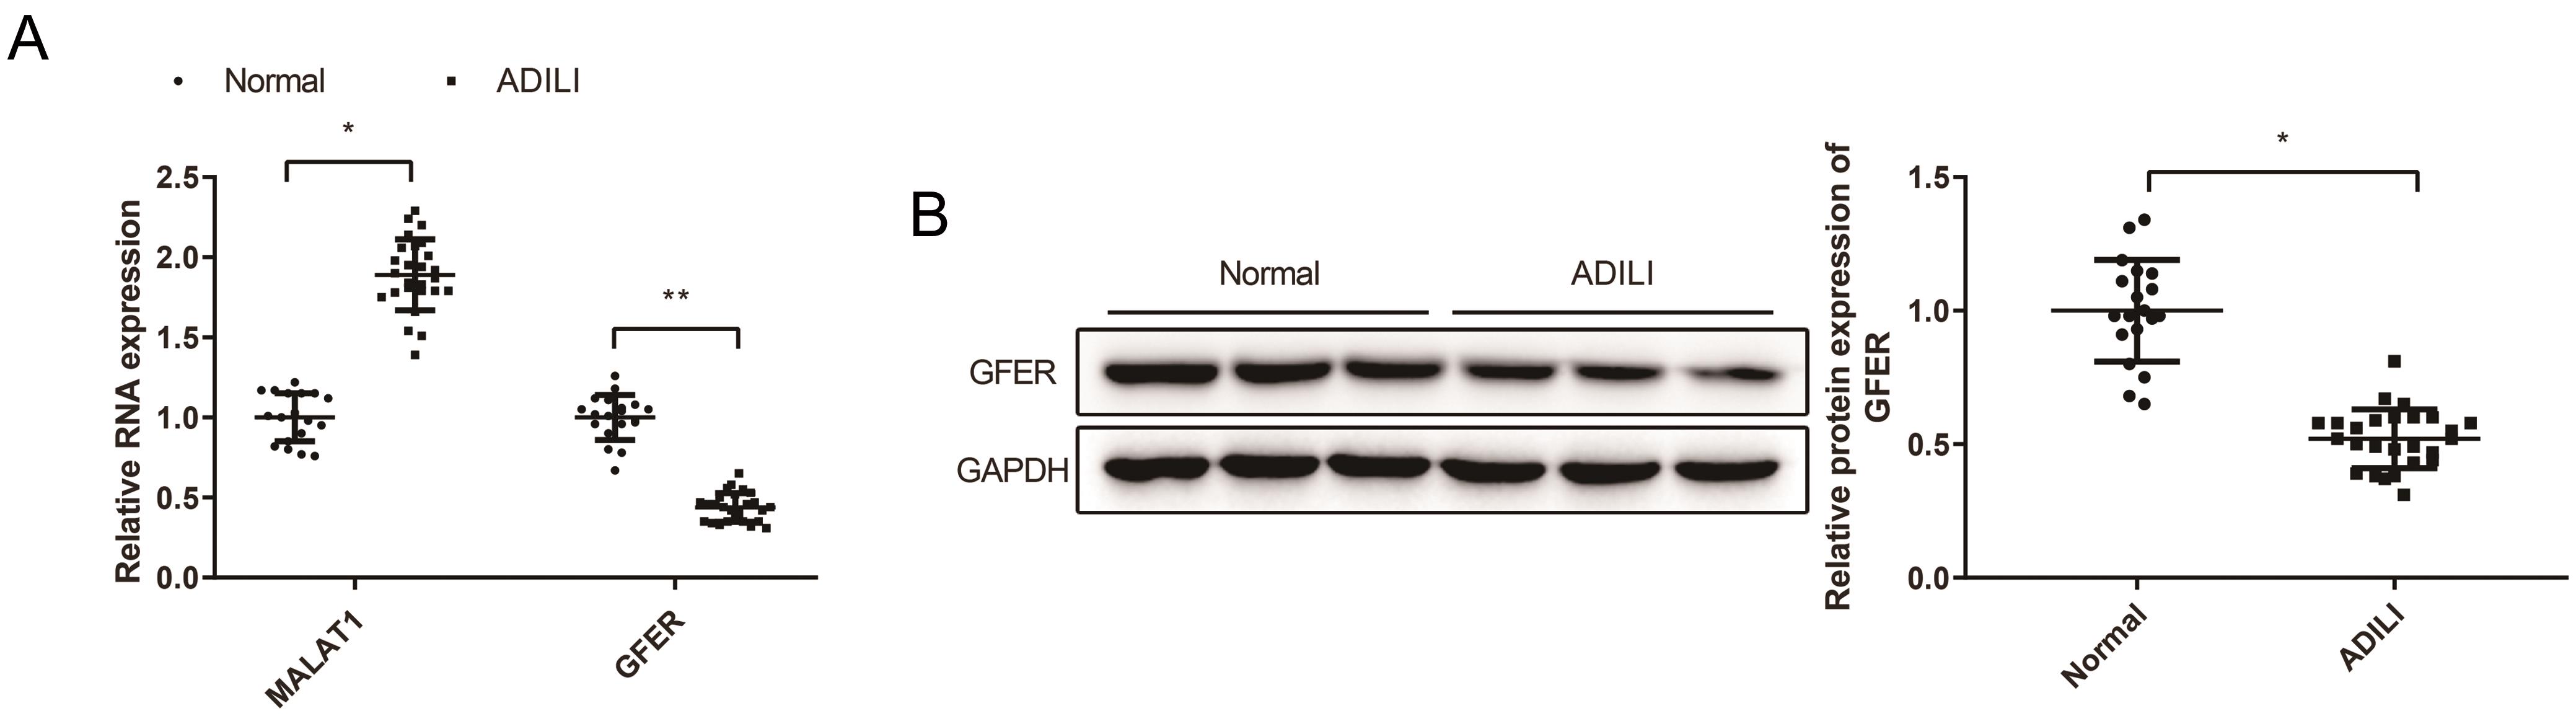 Elevated MALAT1 expression and reduced GFER in ALI.